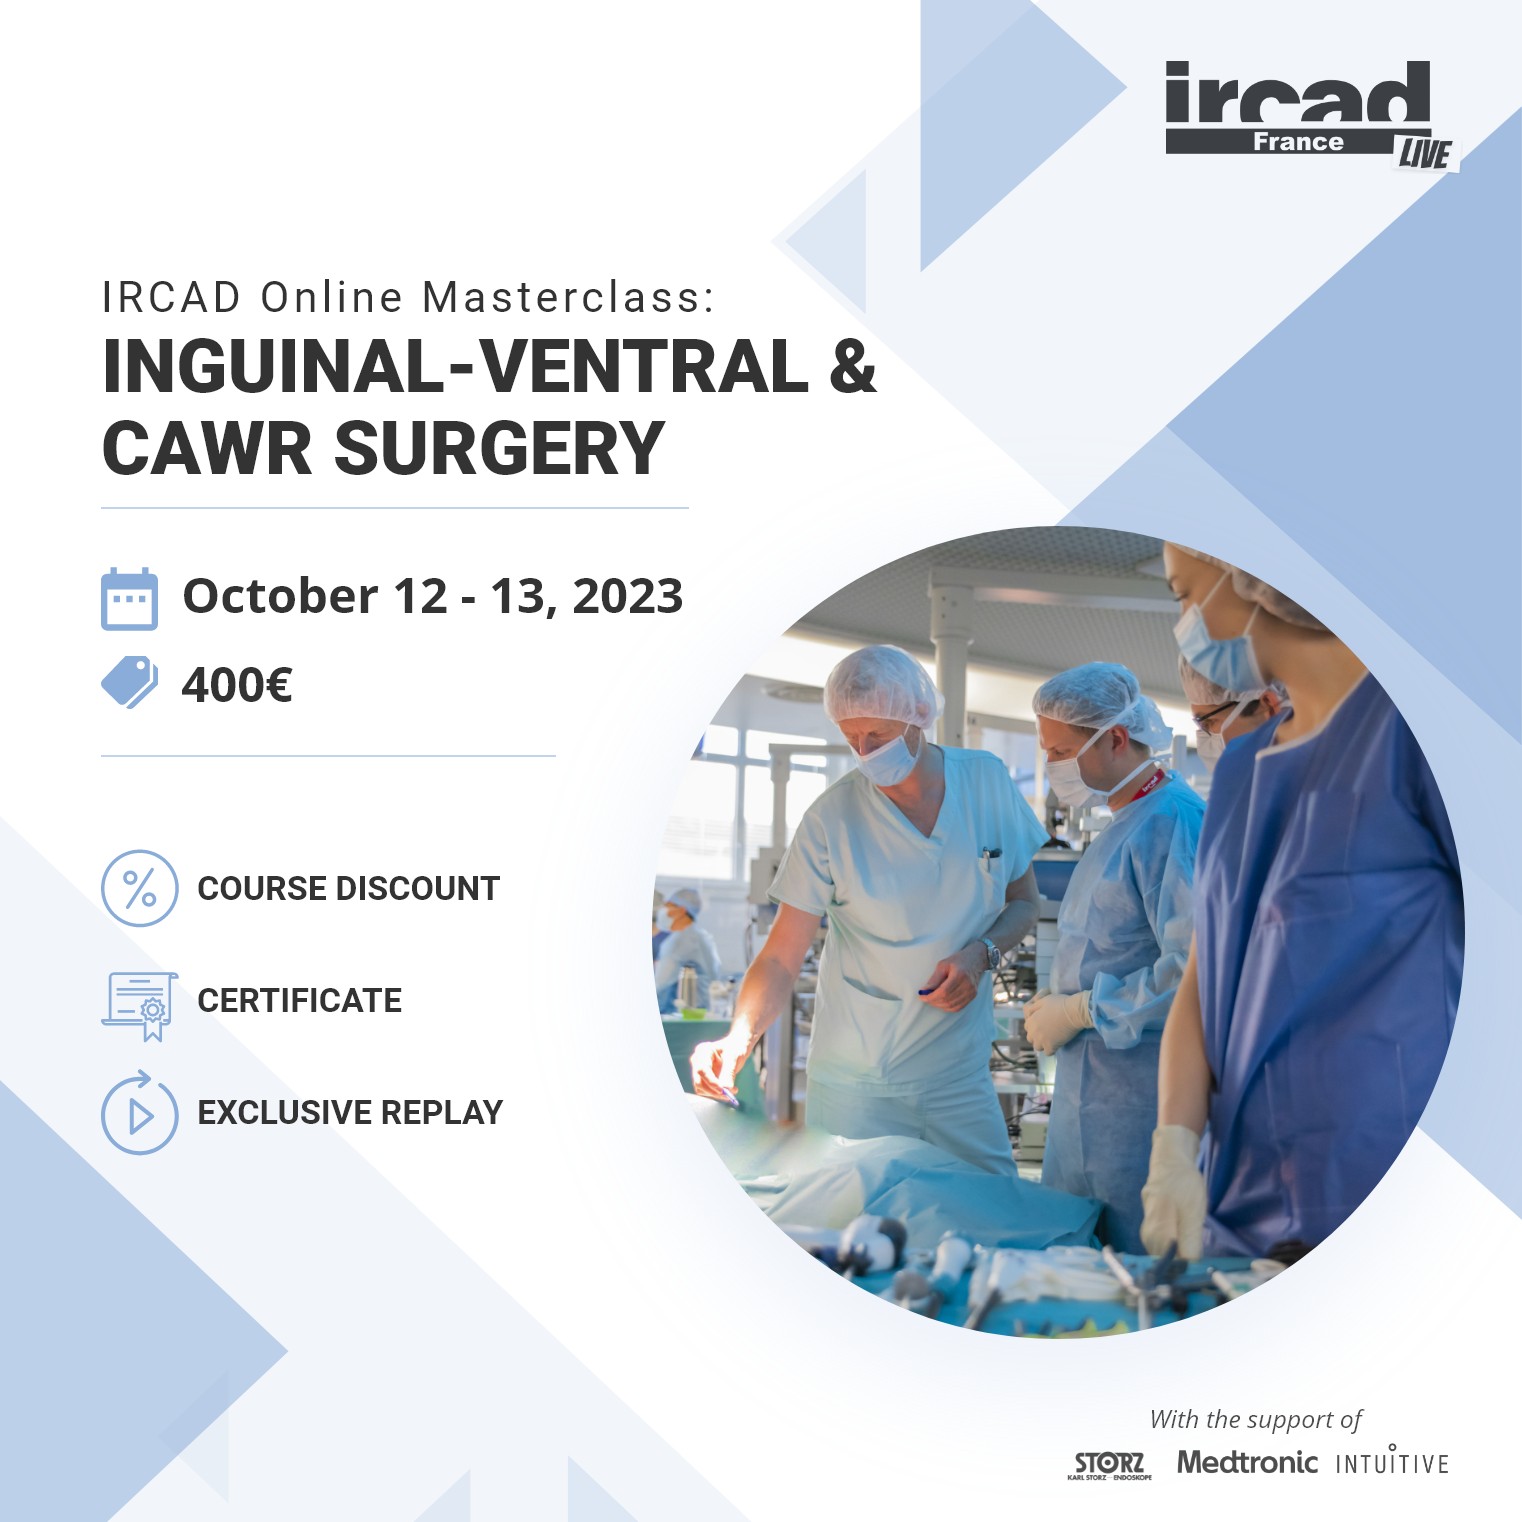 IRCAD Online Masterclass – Inguinal-ventral & CAWR surgery